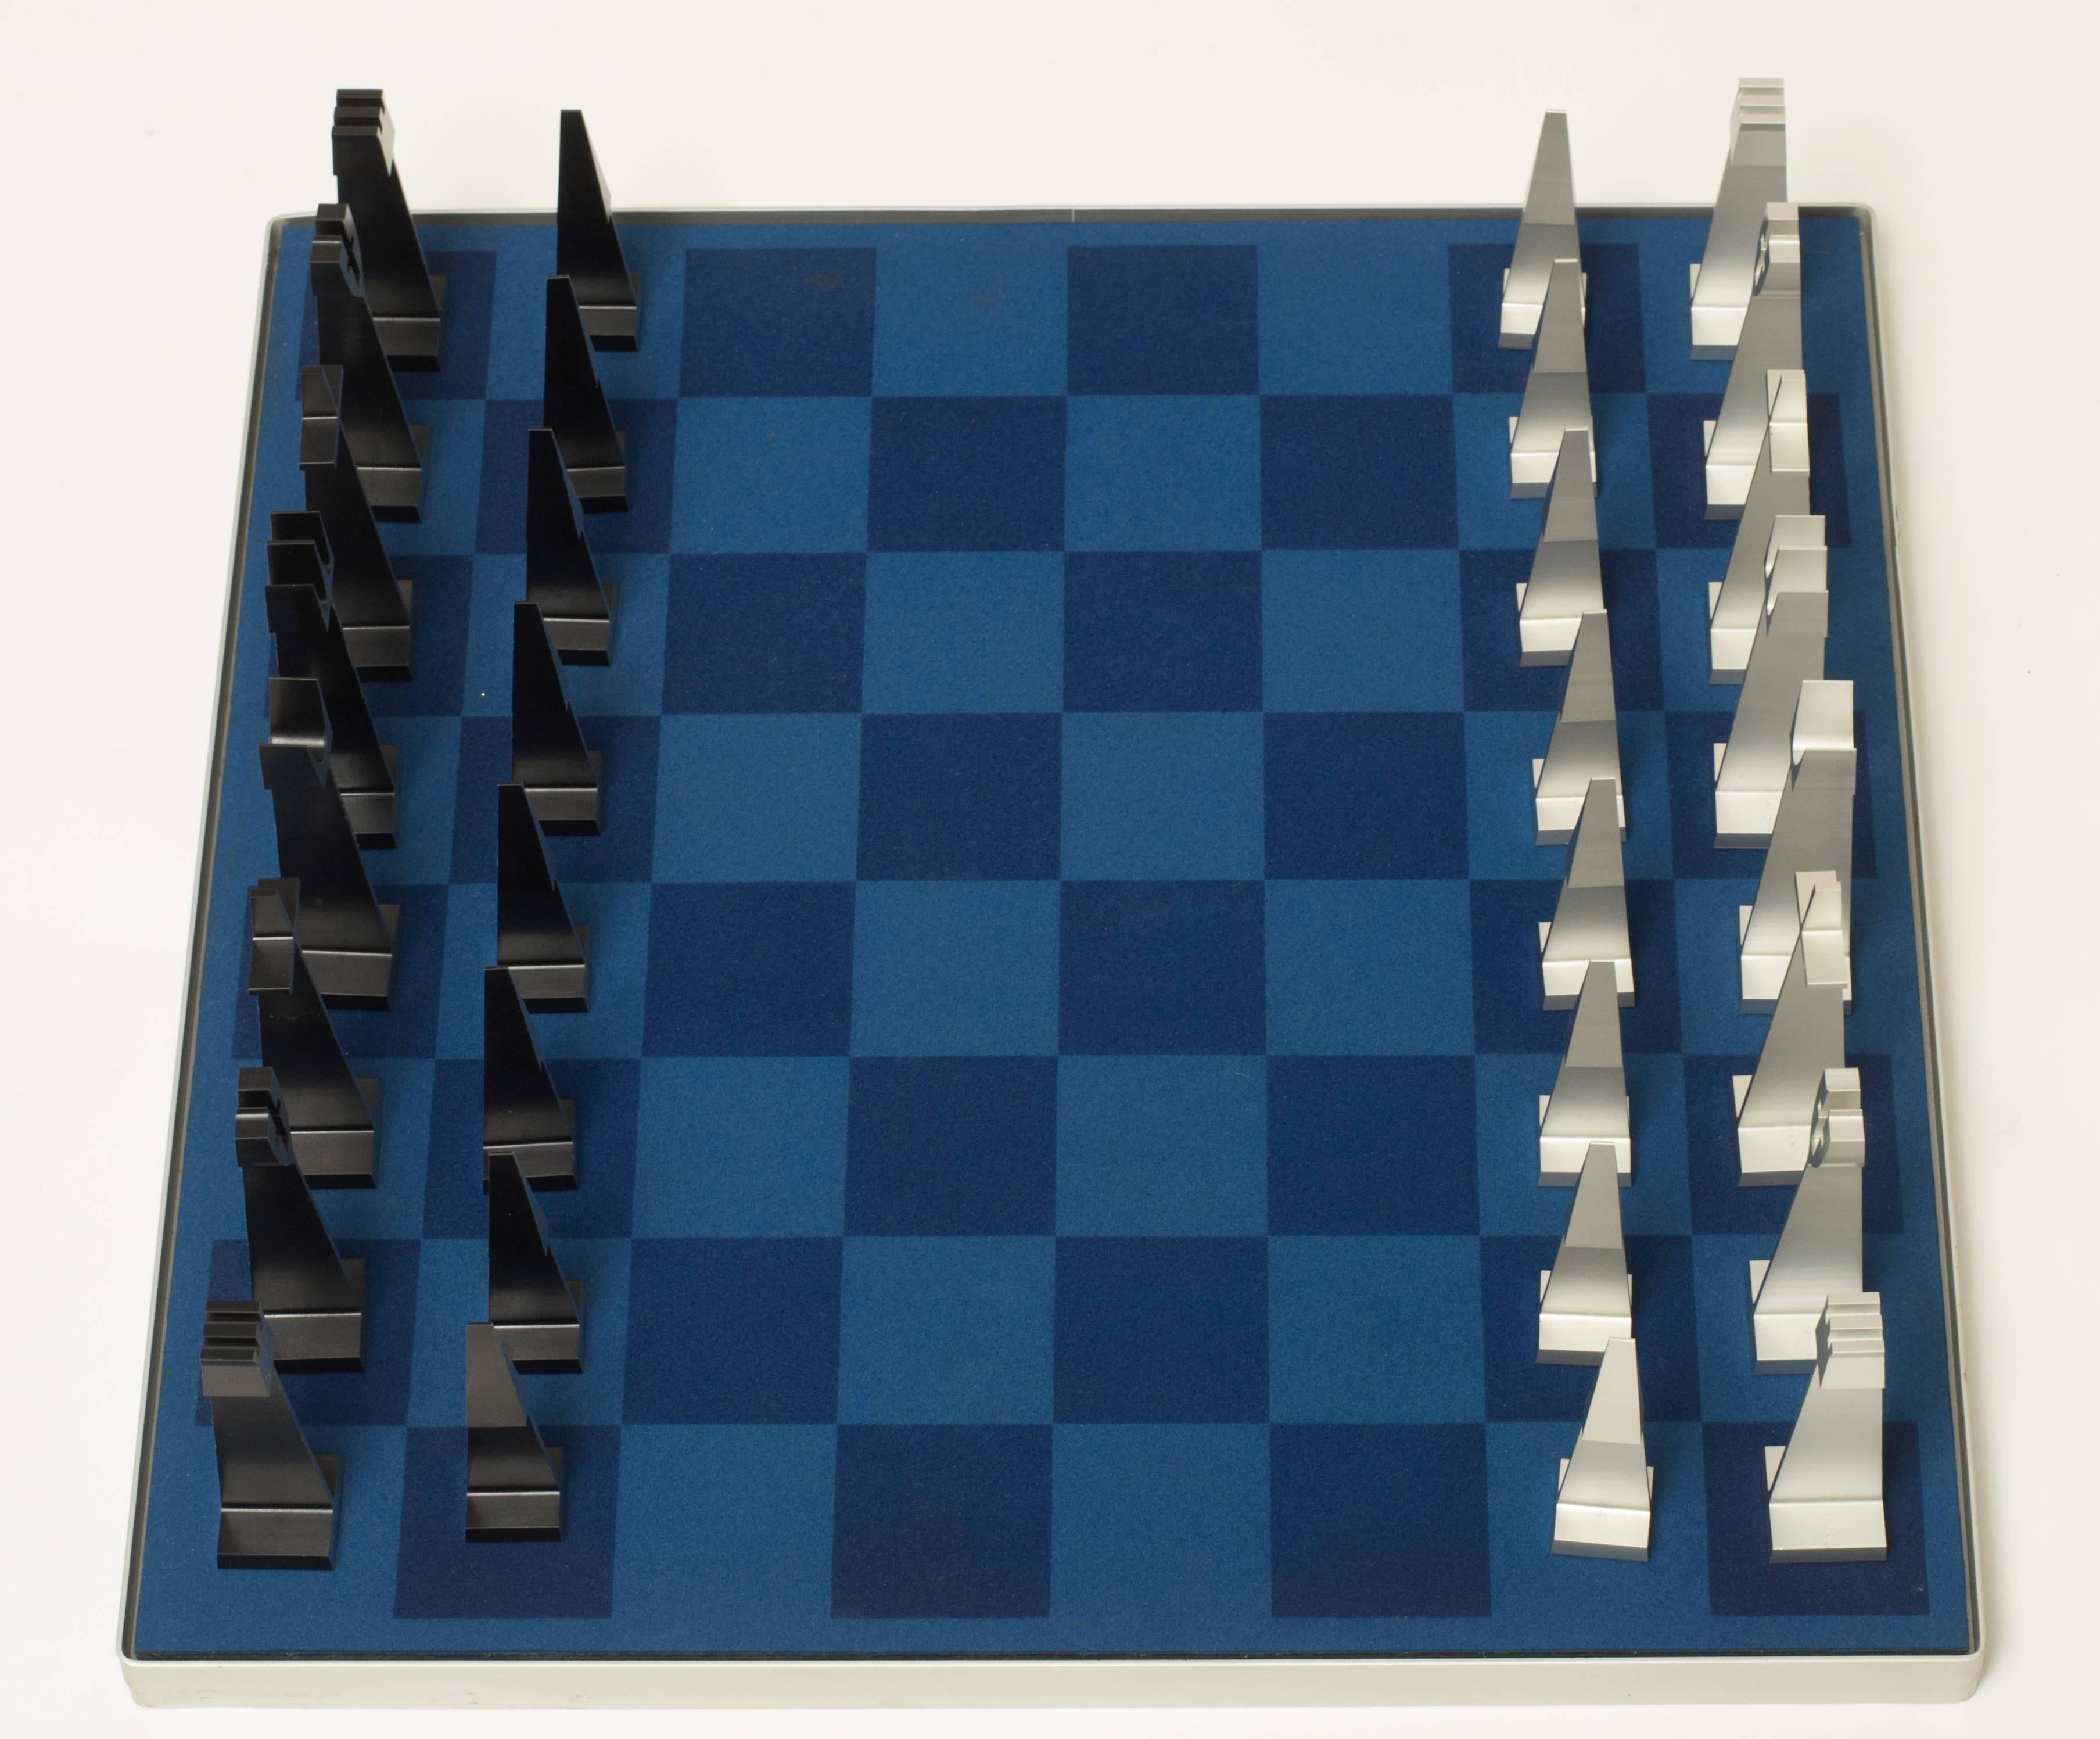 American Mid-Century Modern Chess Set by Austin Cox for ALCOA, 1962